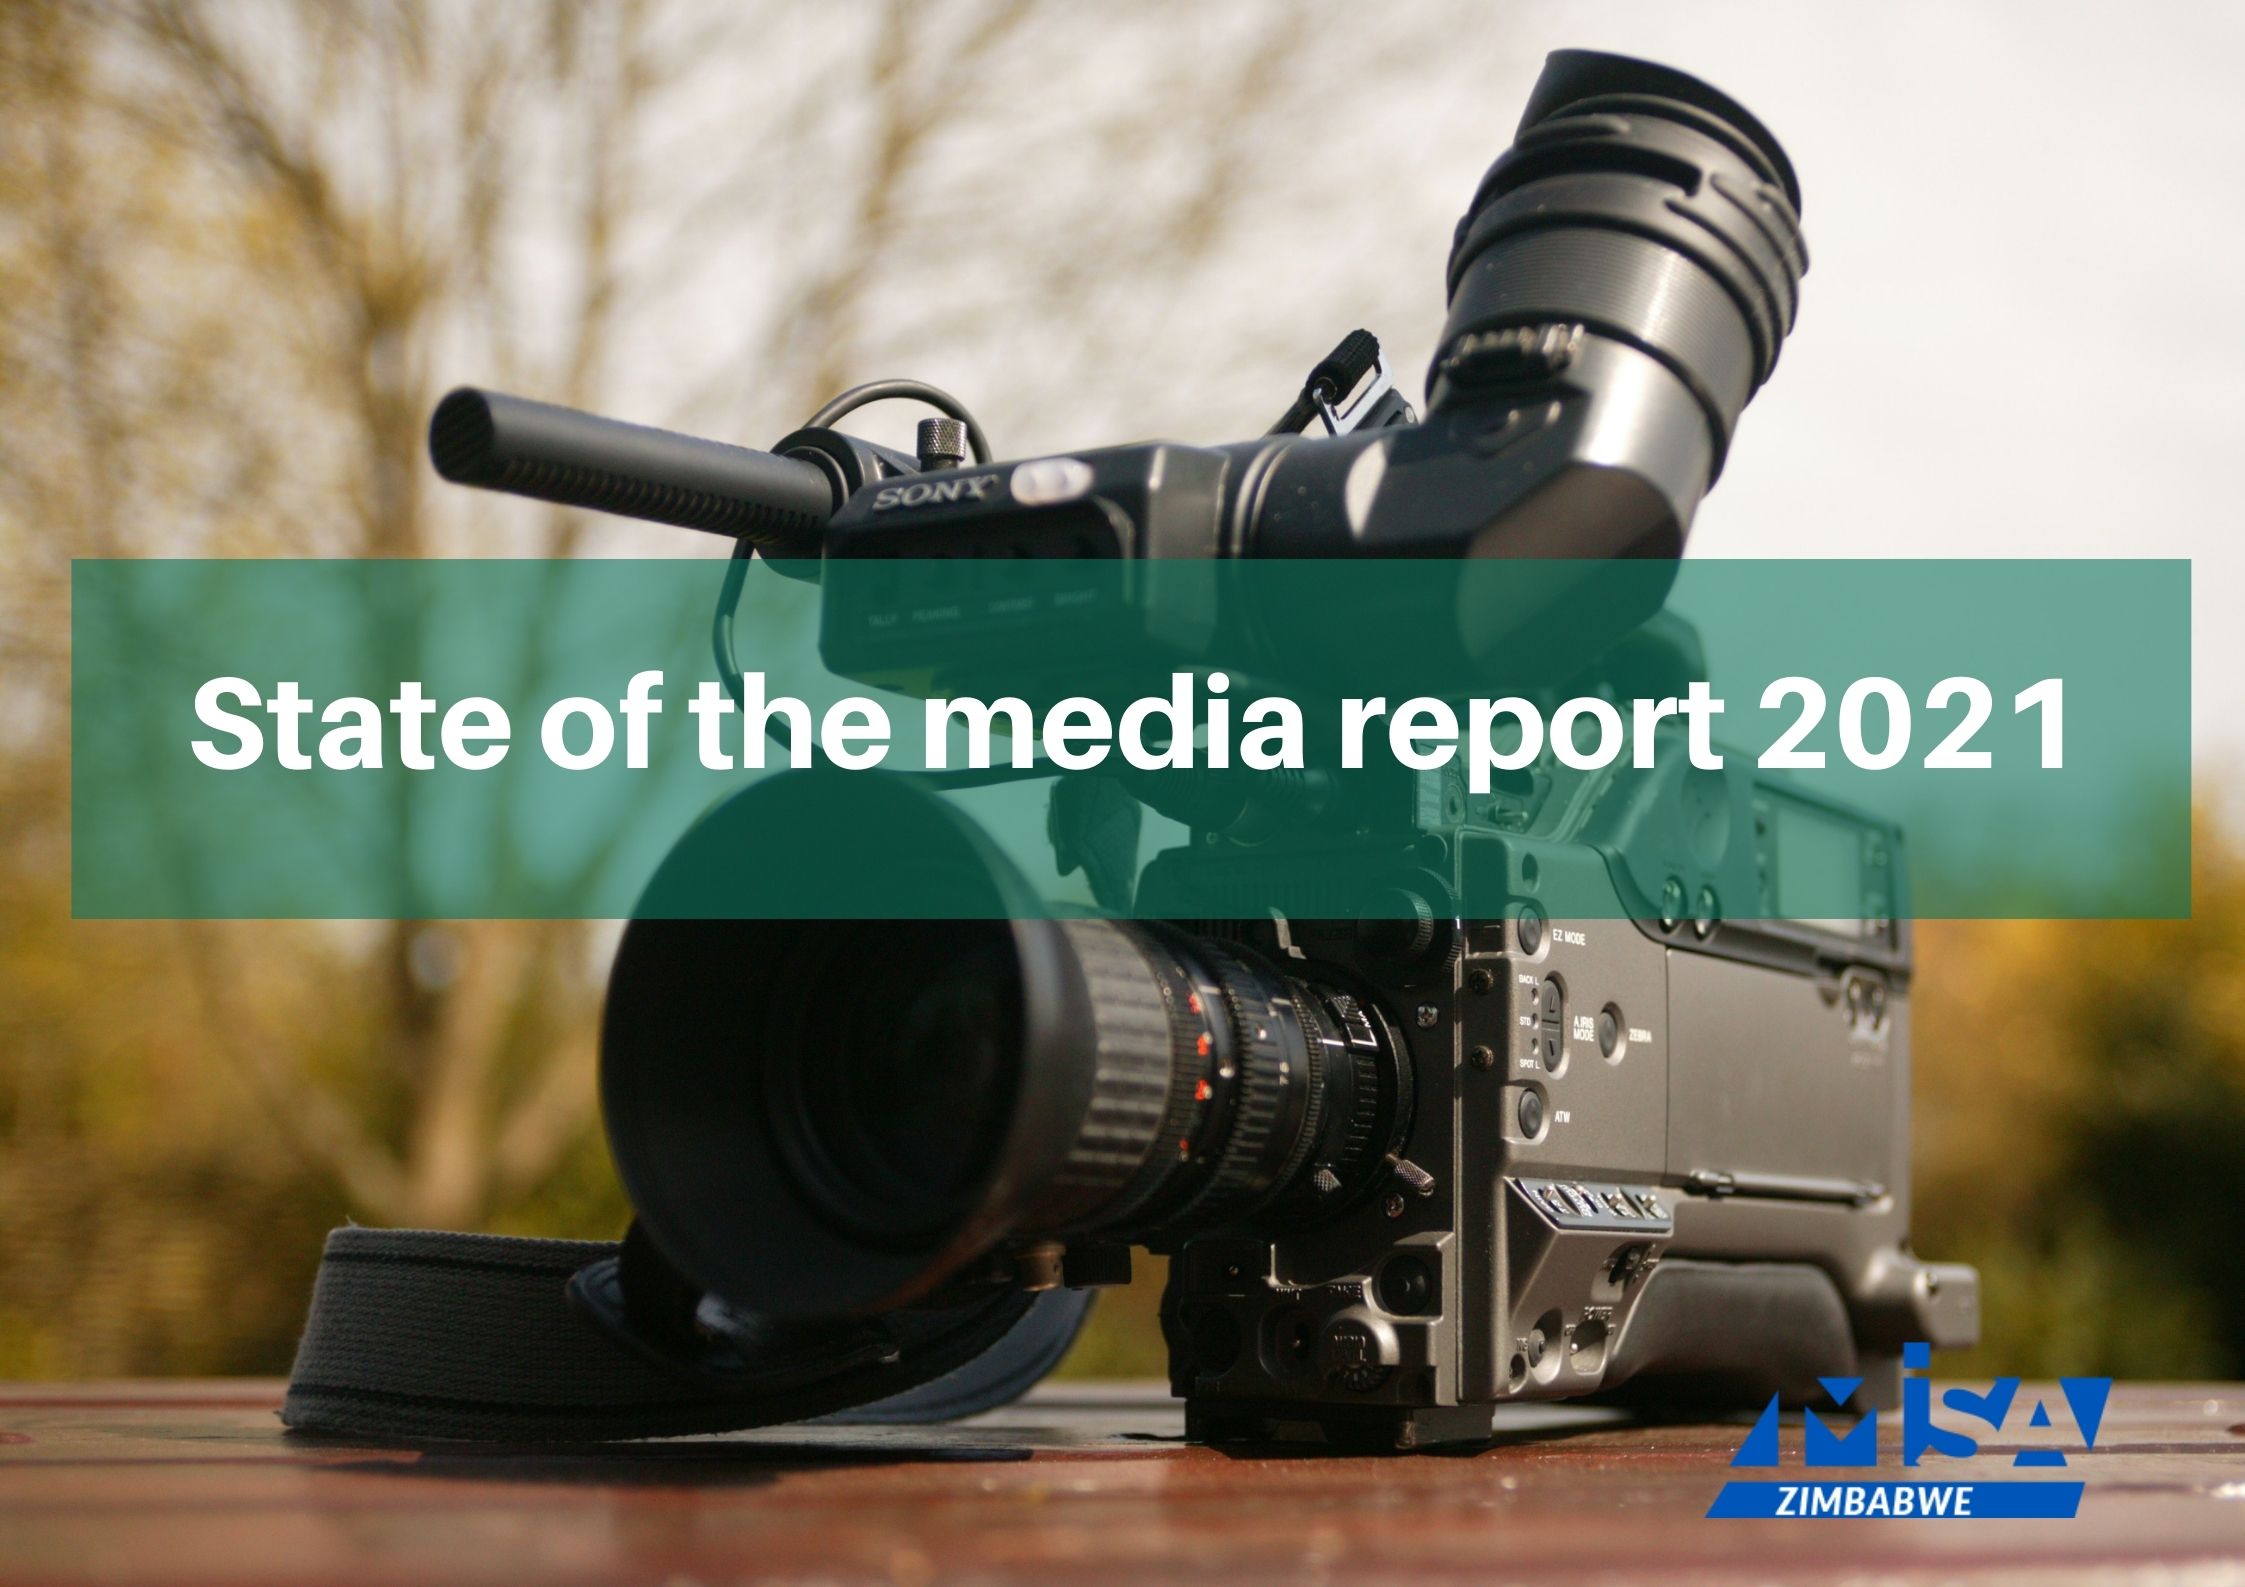 State of the Media 2021 report now available!